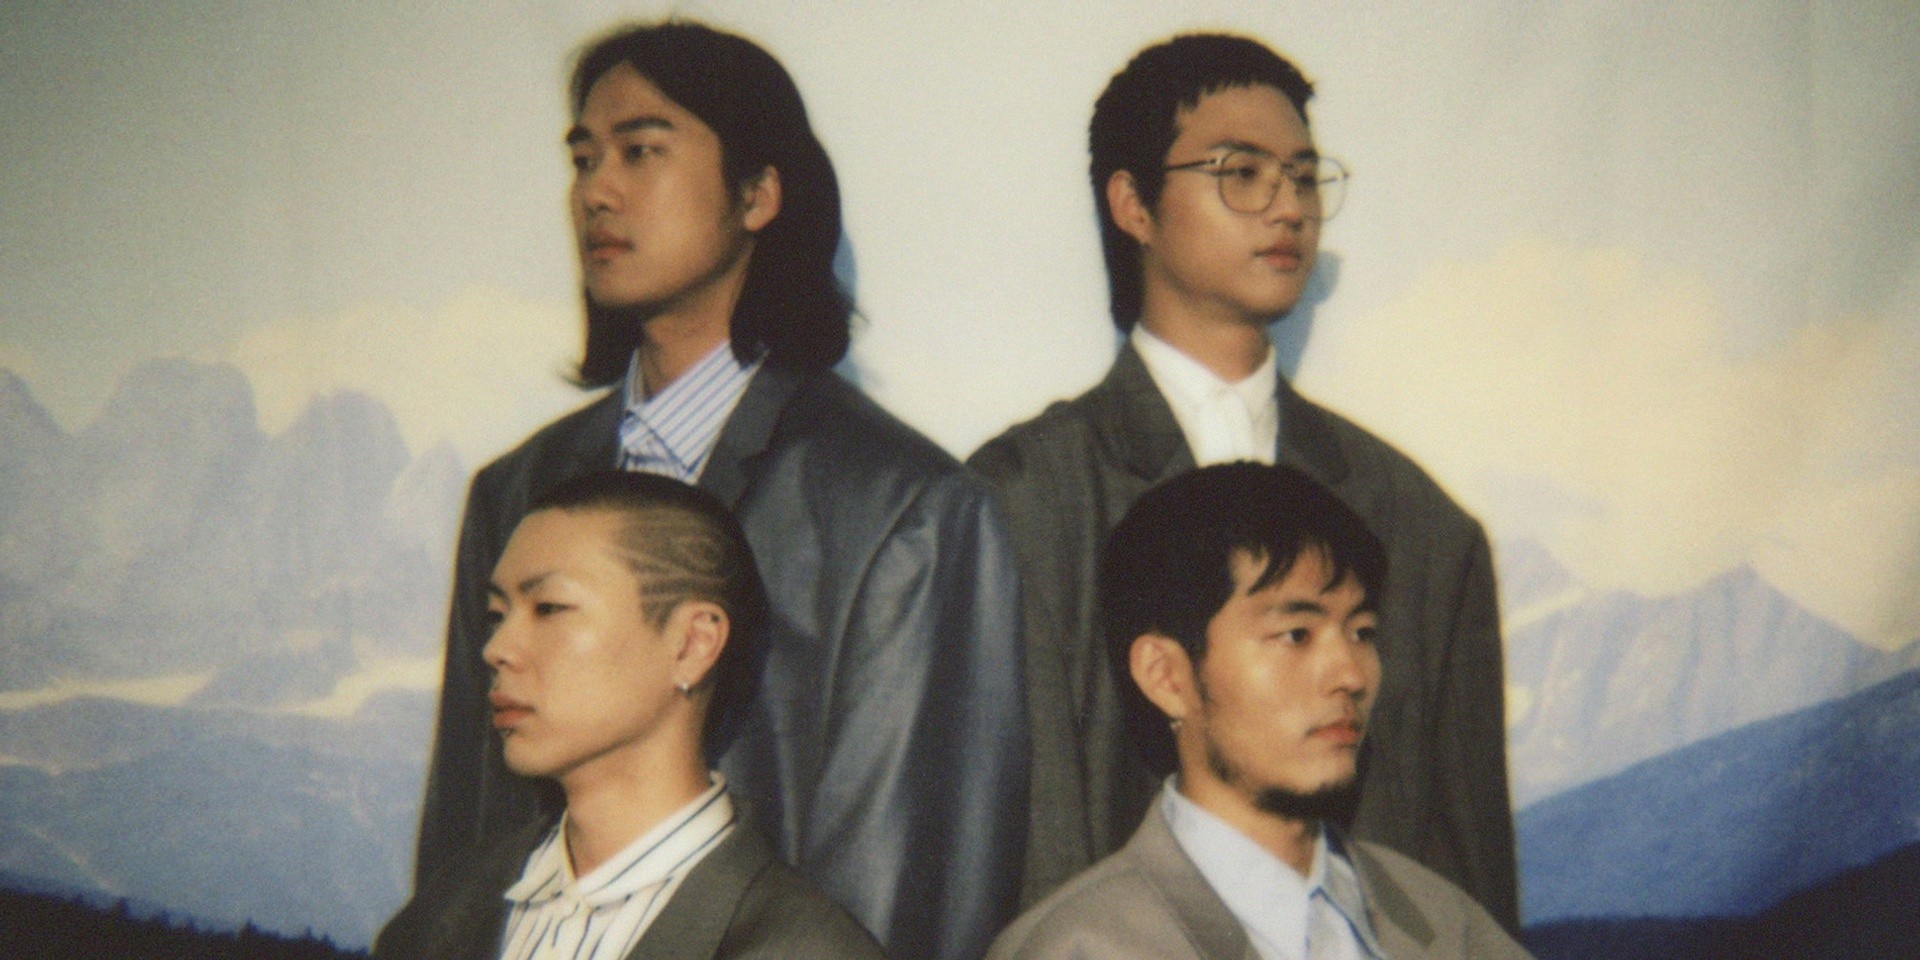 HYUKOH will perform in Singapore for the first time